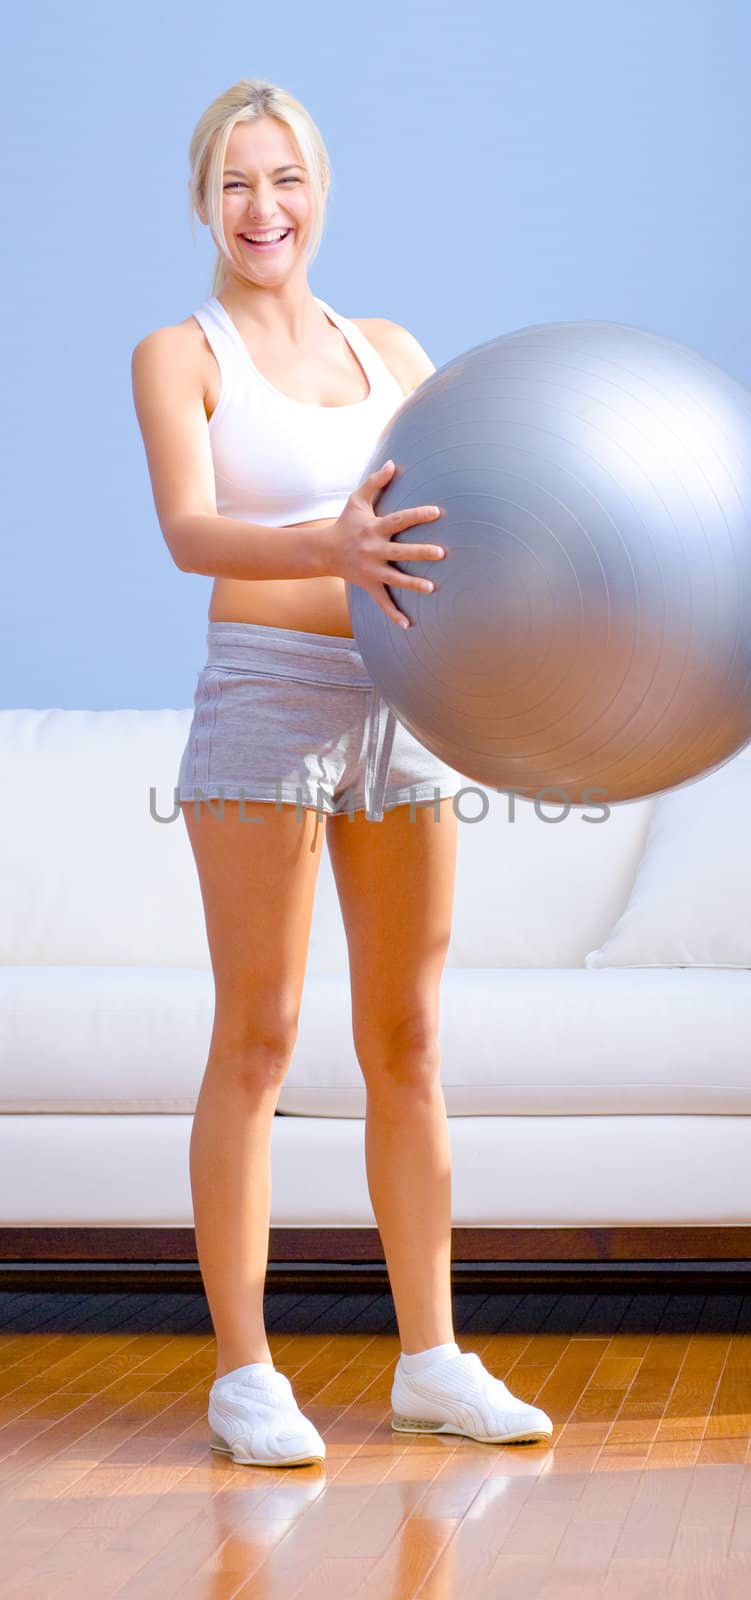 Young woman wearing sportswear holds a balance ball in a living room.  Vertical shot.